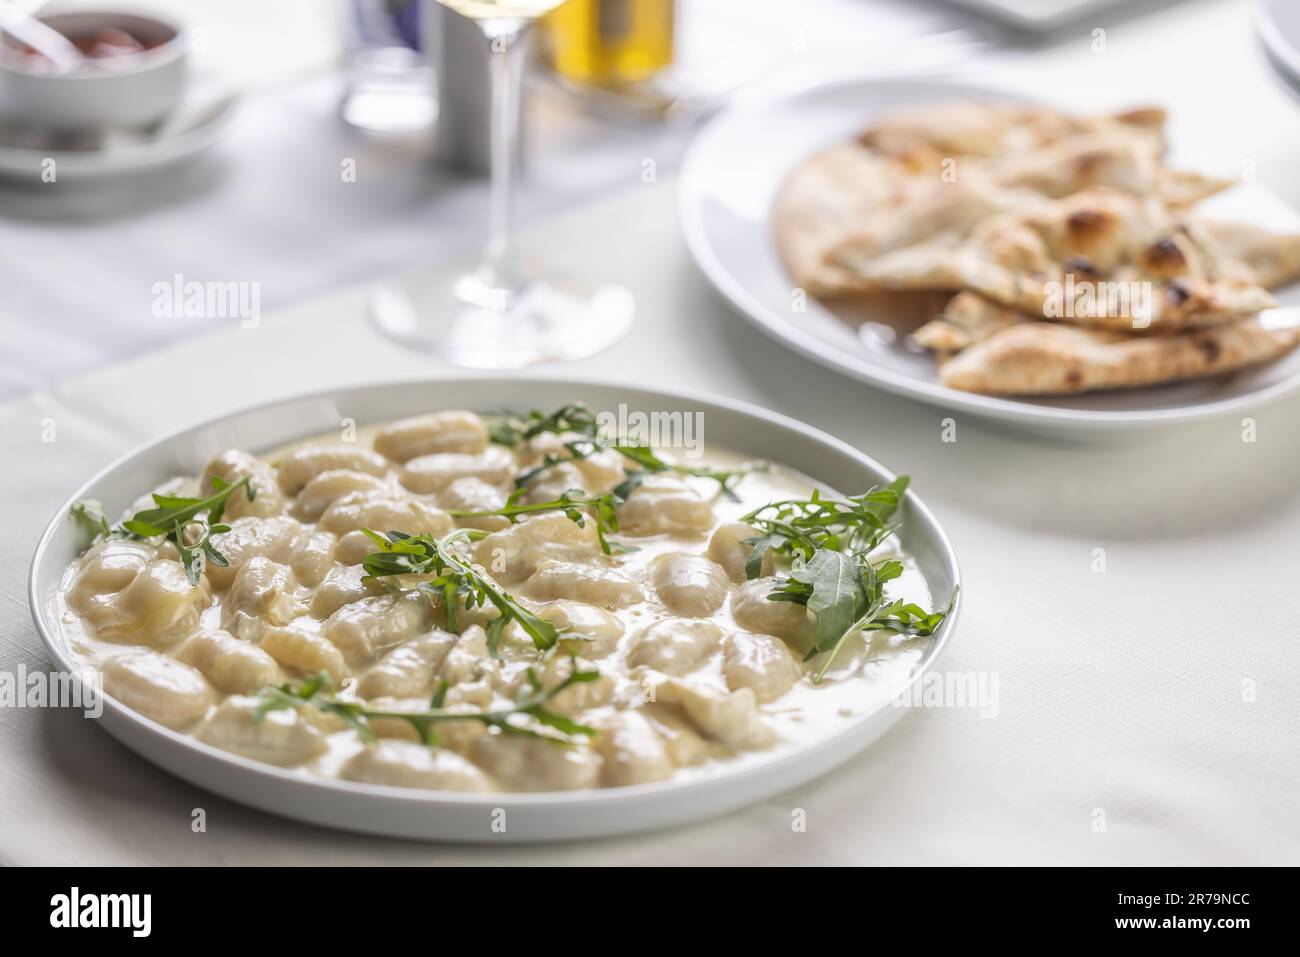 Gnocchi with cheese, hearty food from northern Italy, served with ruccola. Stock Photo